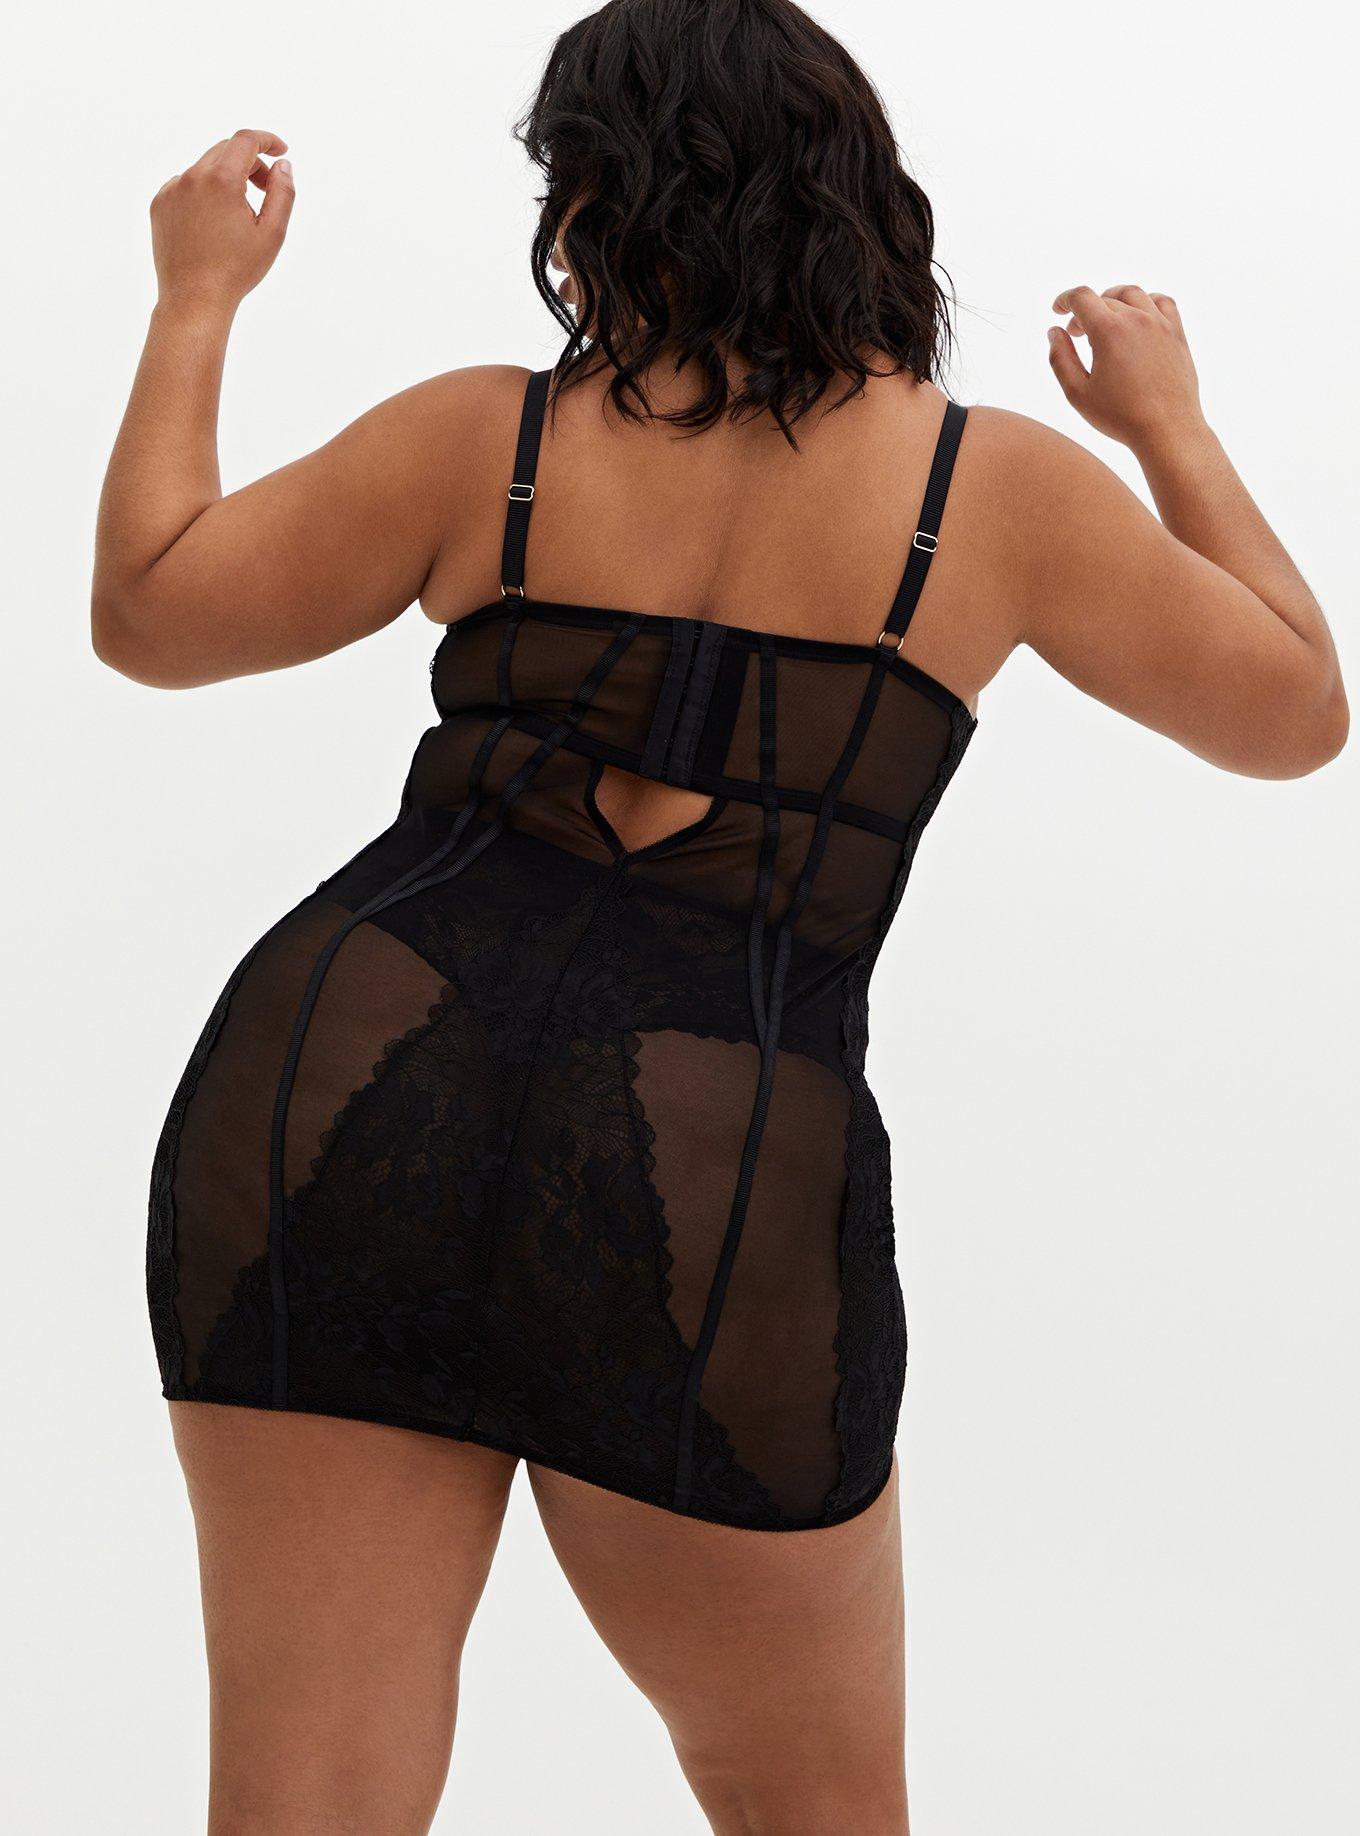 Plus Size - Black Strappy Chantilly Lace Underwire Chemise - Torrid